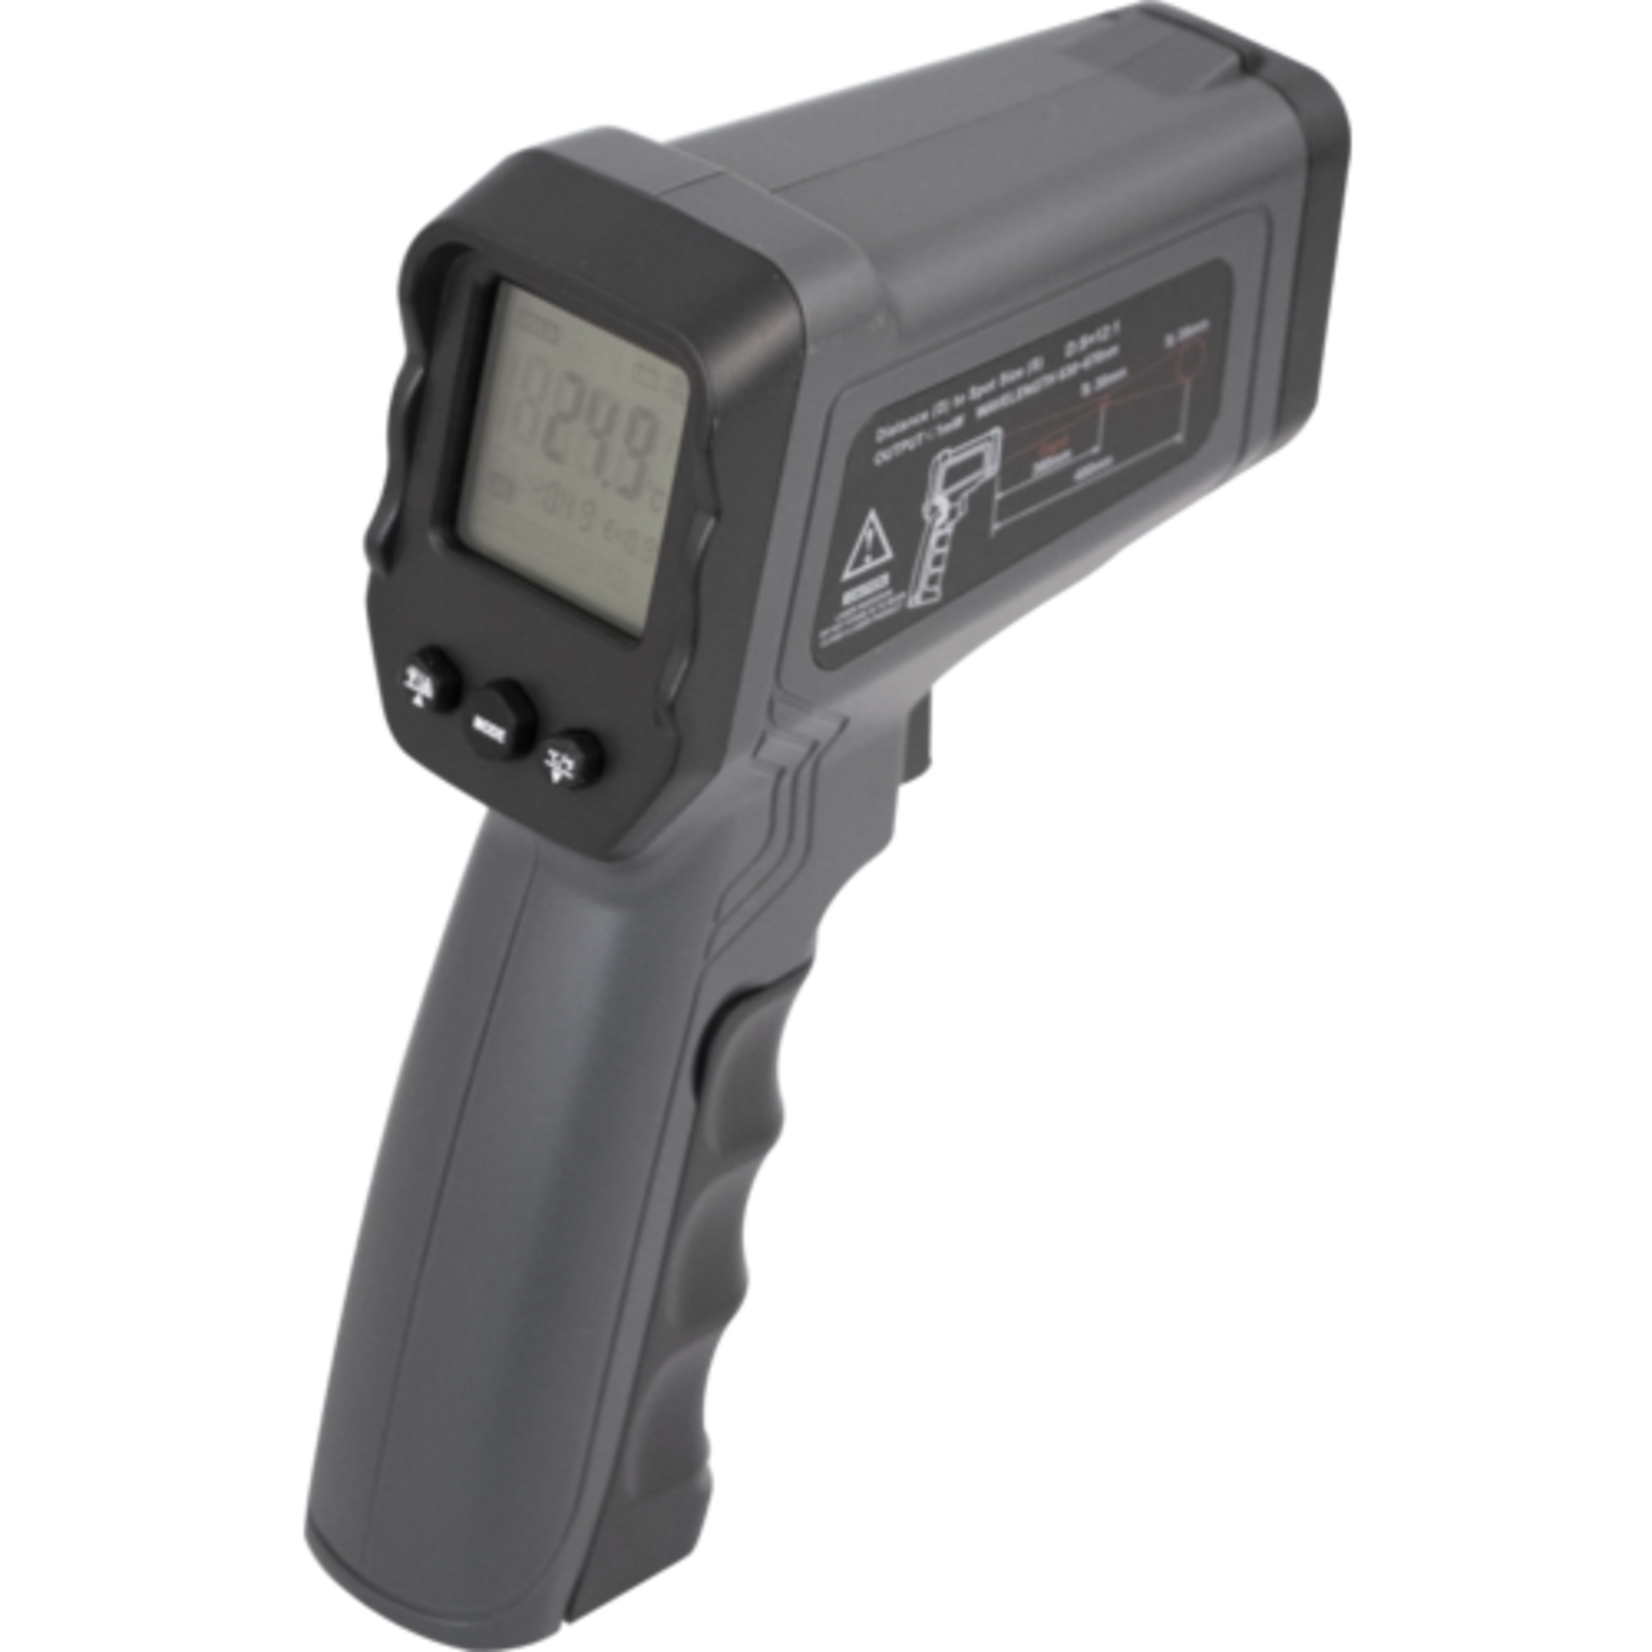 Double Laser Infrared Thermometer Gun 8000 Series